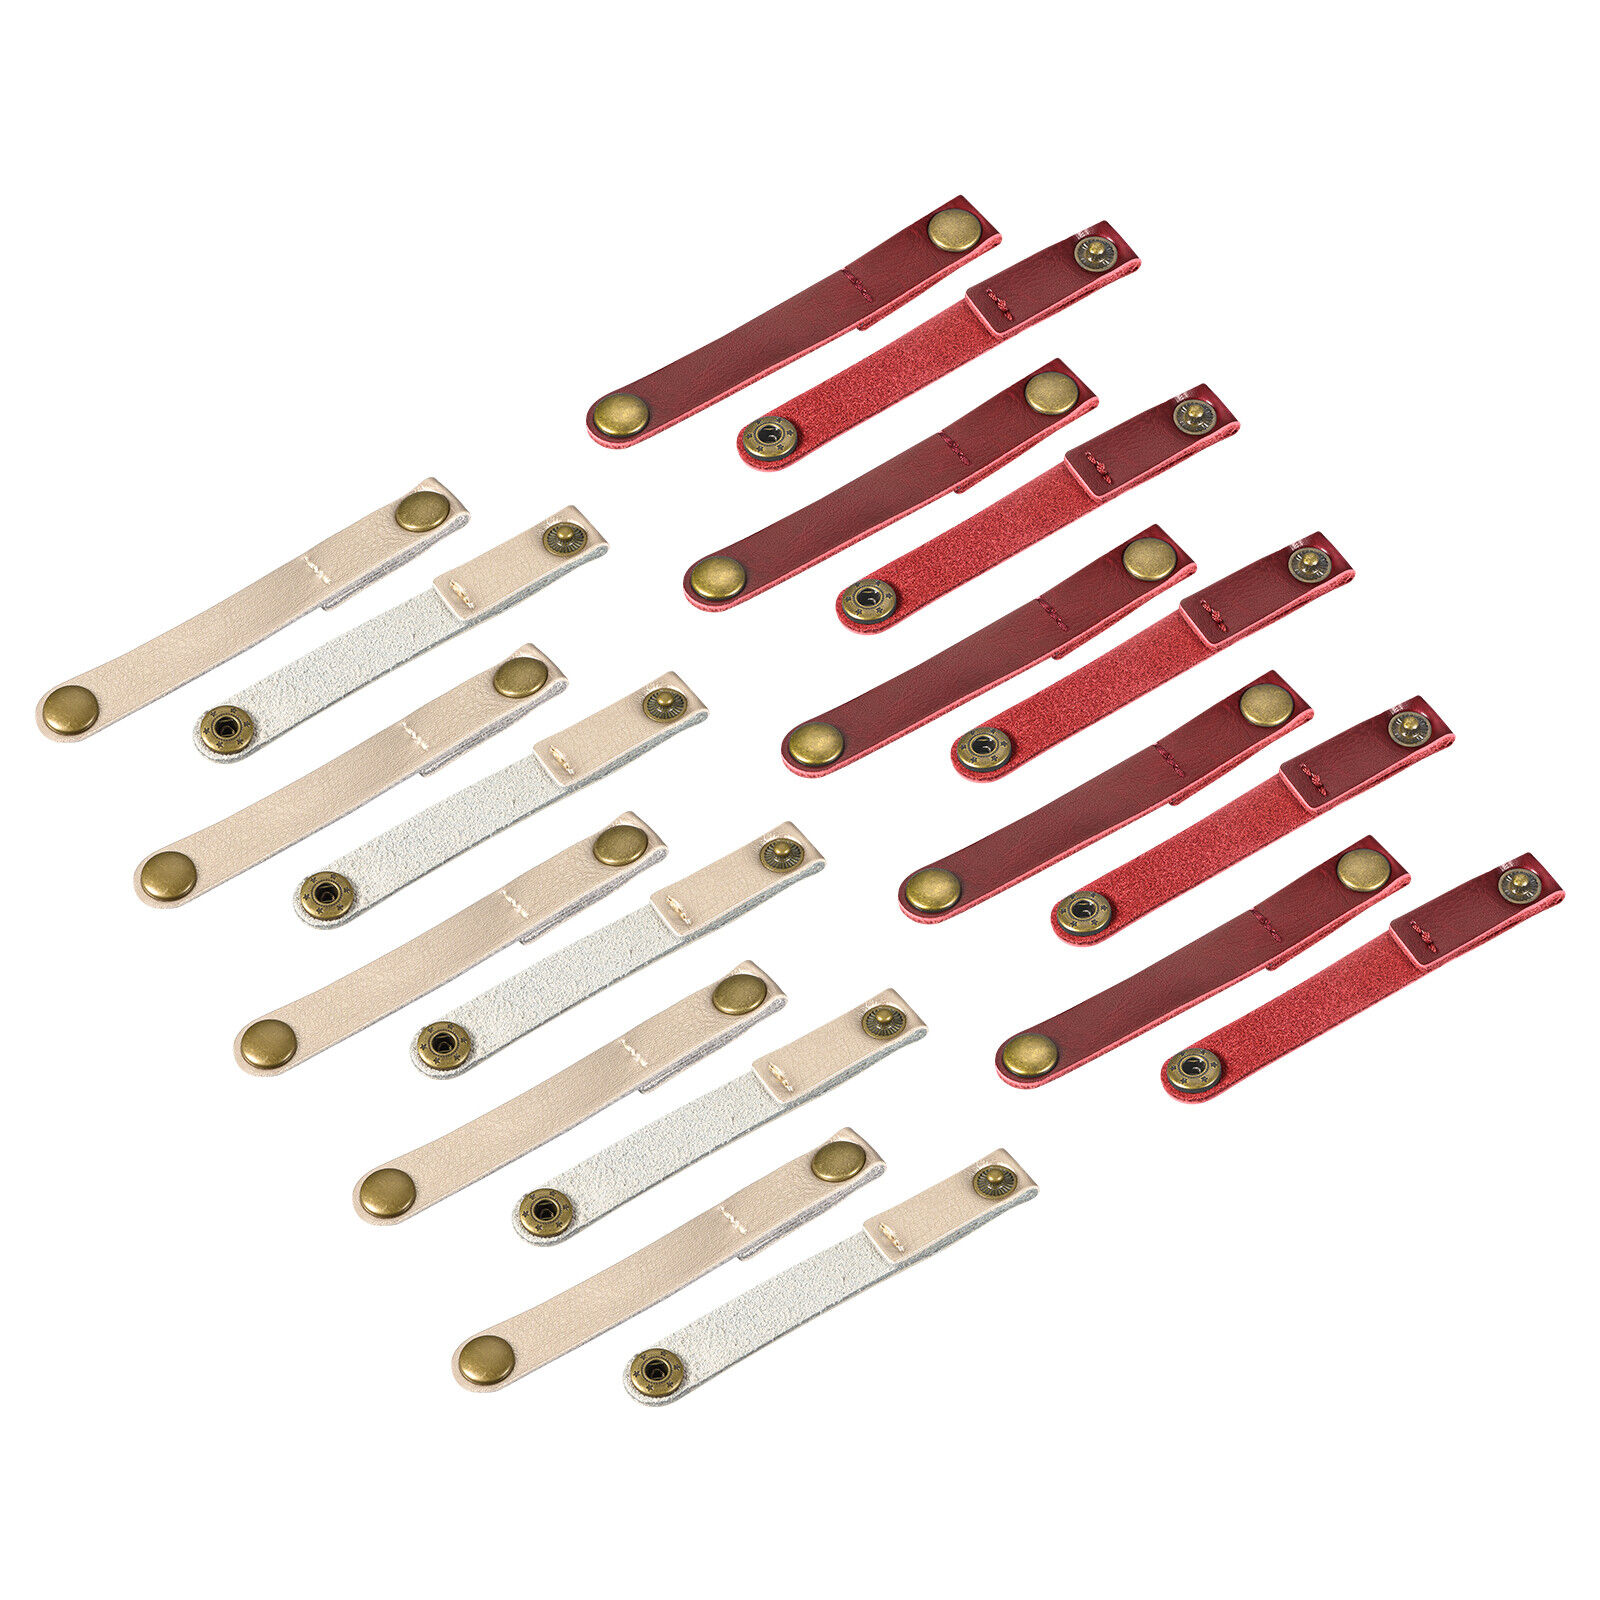 Leather Cable Straps Cable Ties, Cord Organizer, Wine Red/Golden, 20pcs